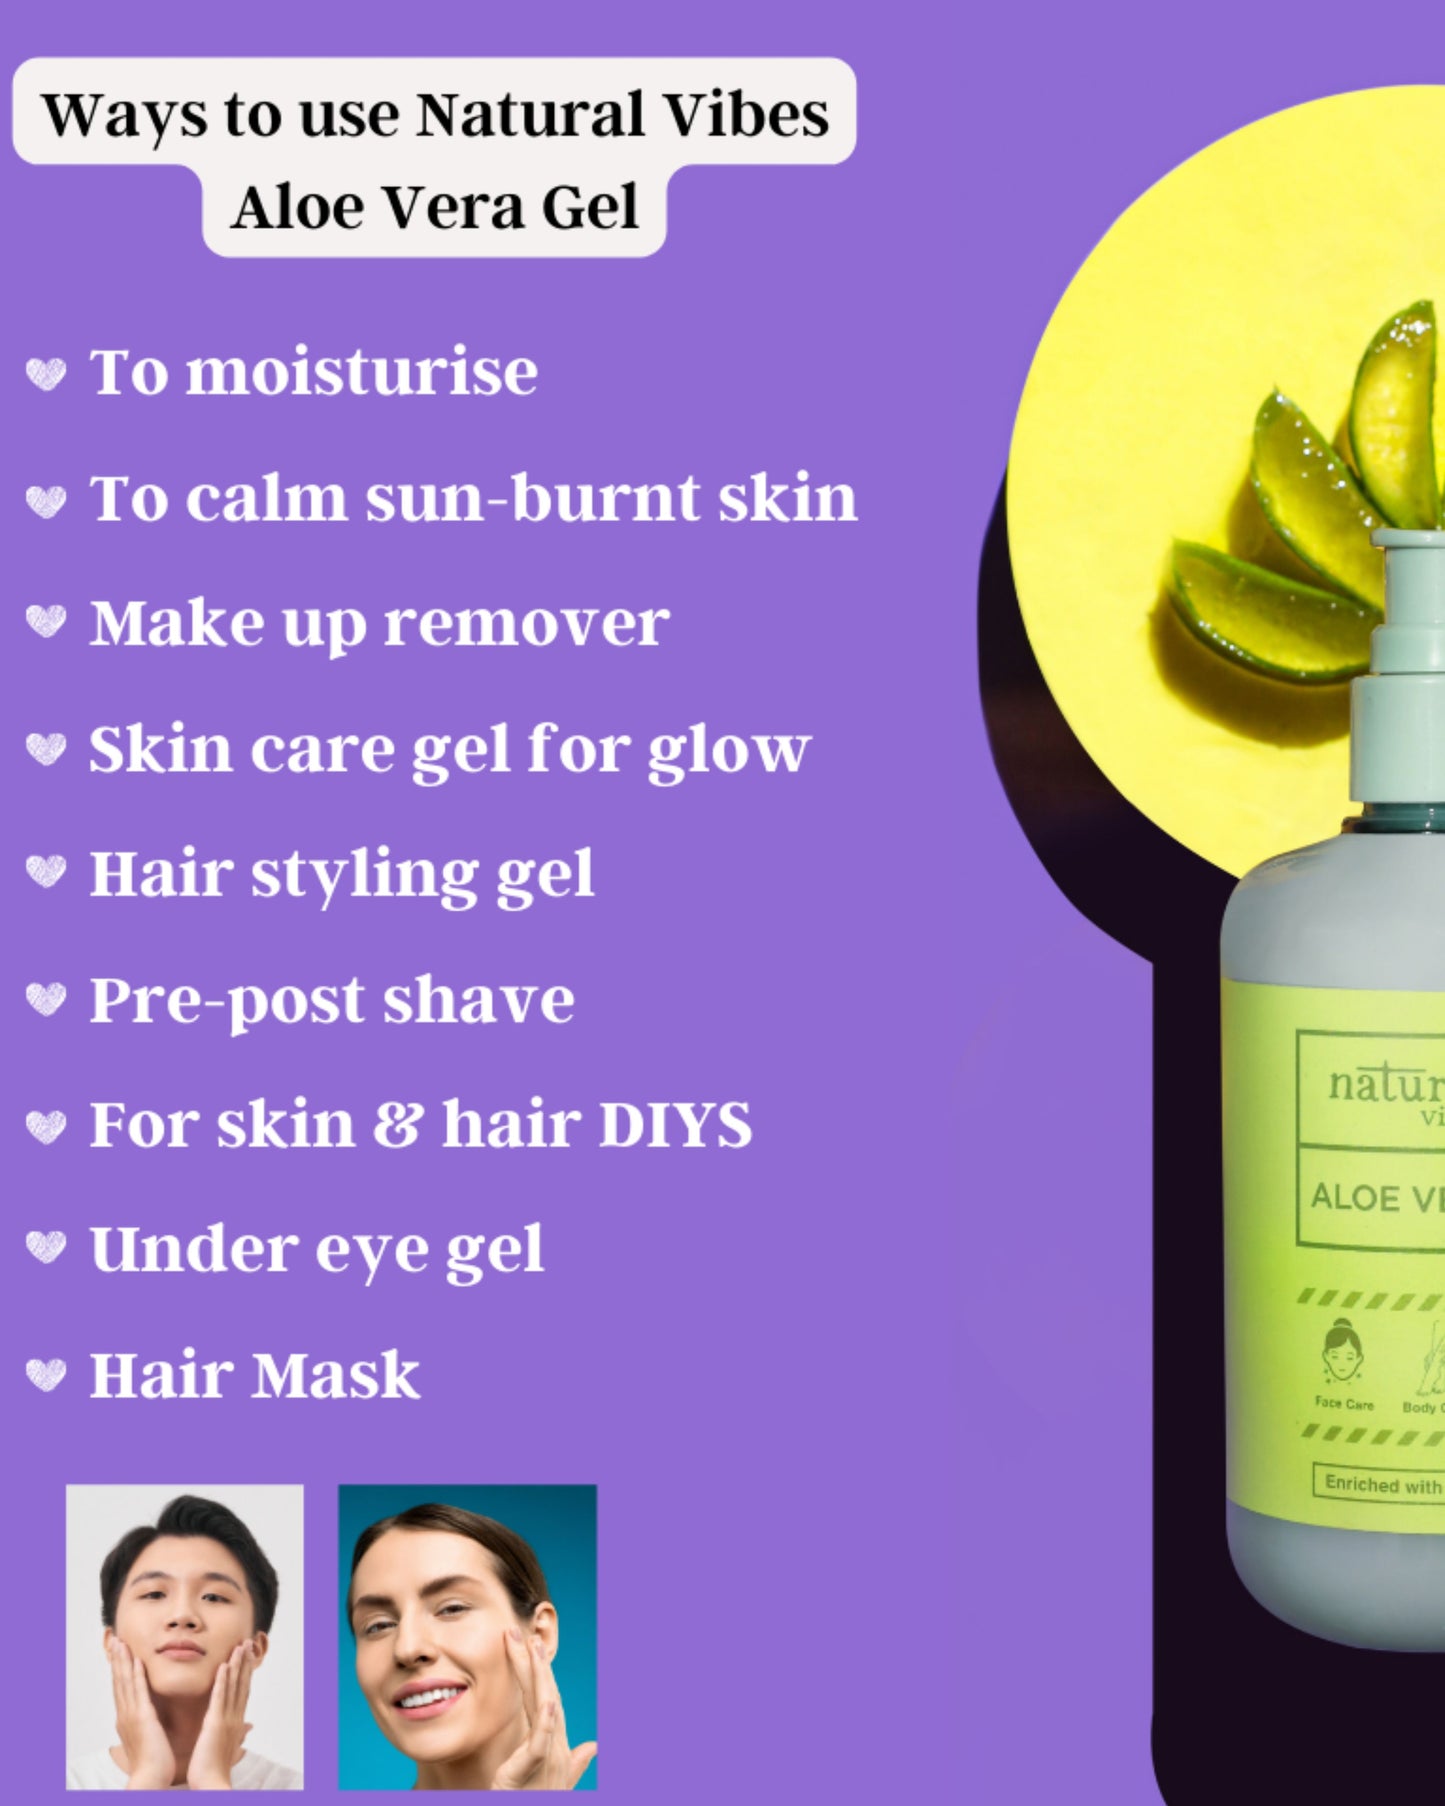 Natural Vibes Aloe Vera Gel with Vitamin C & E for Face, Hair & Body ( 300 ml )